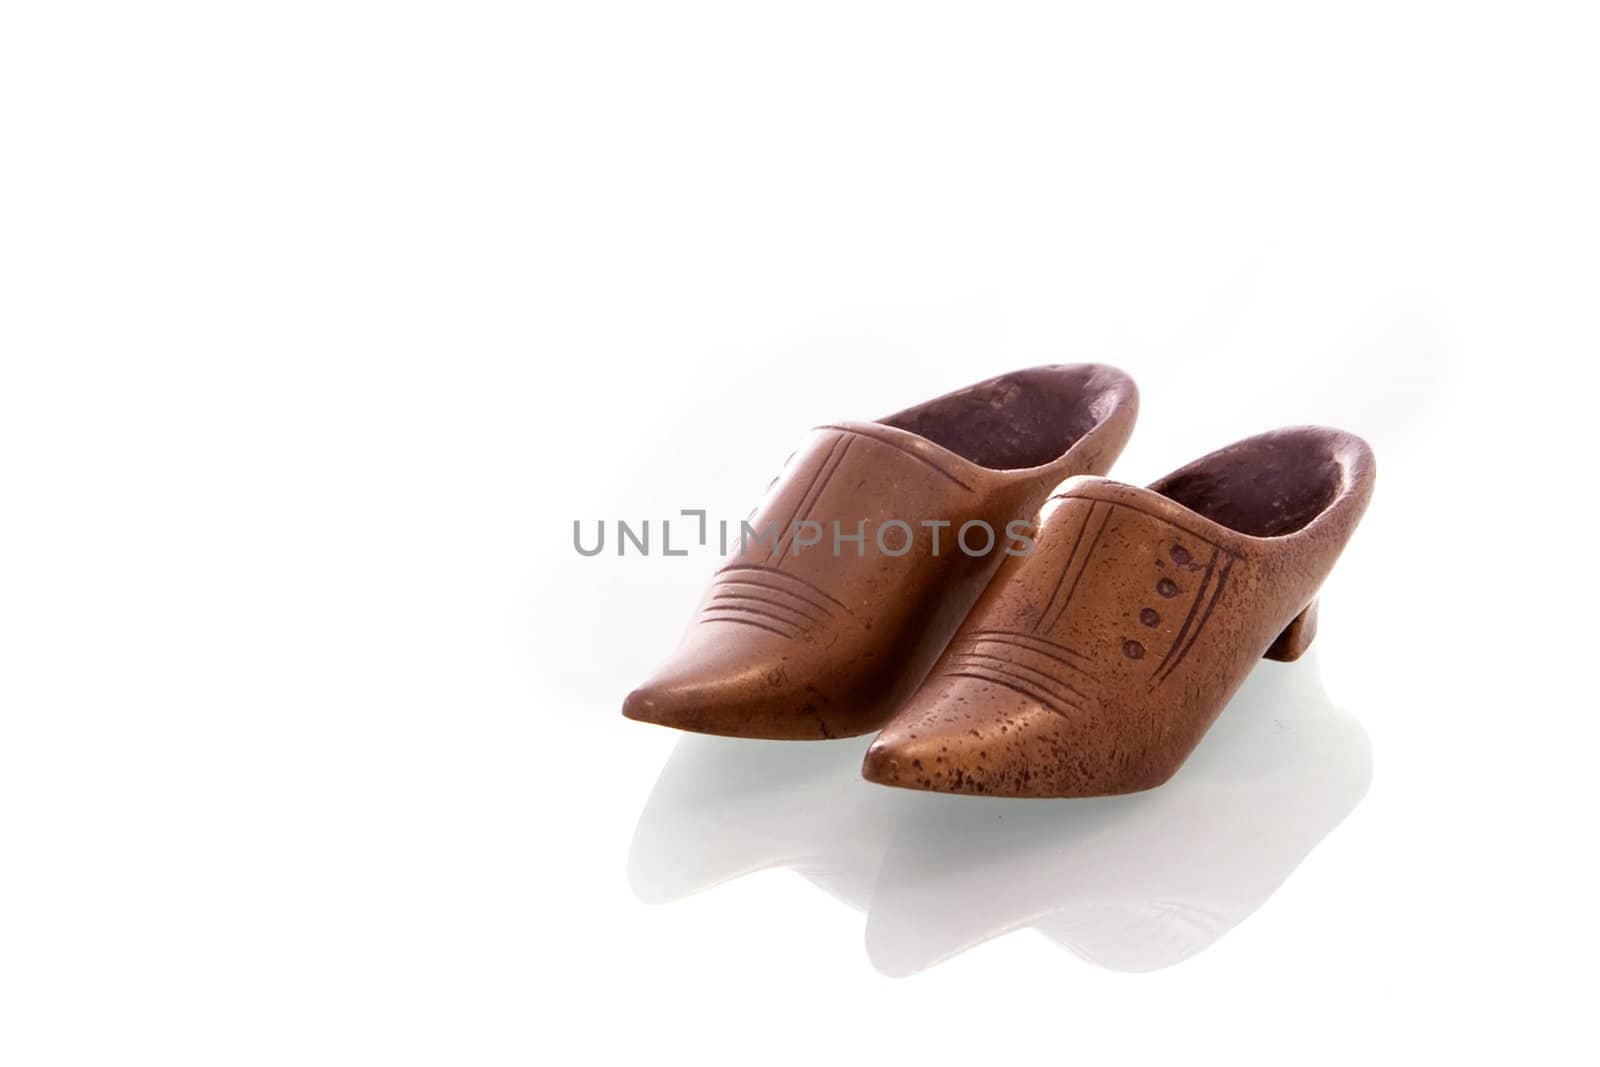 a pair of copper shoes on a white background